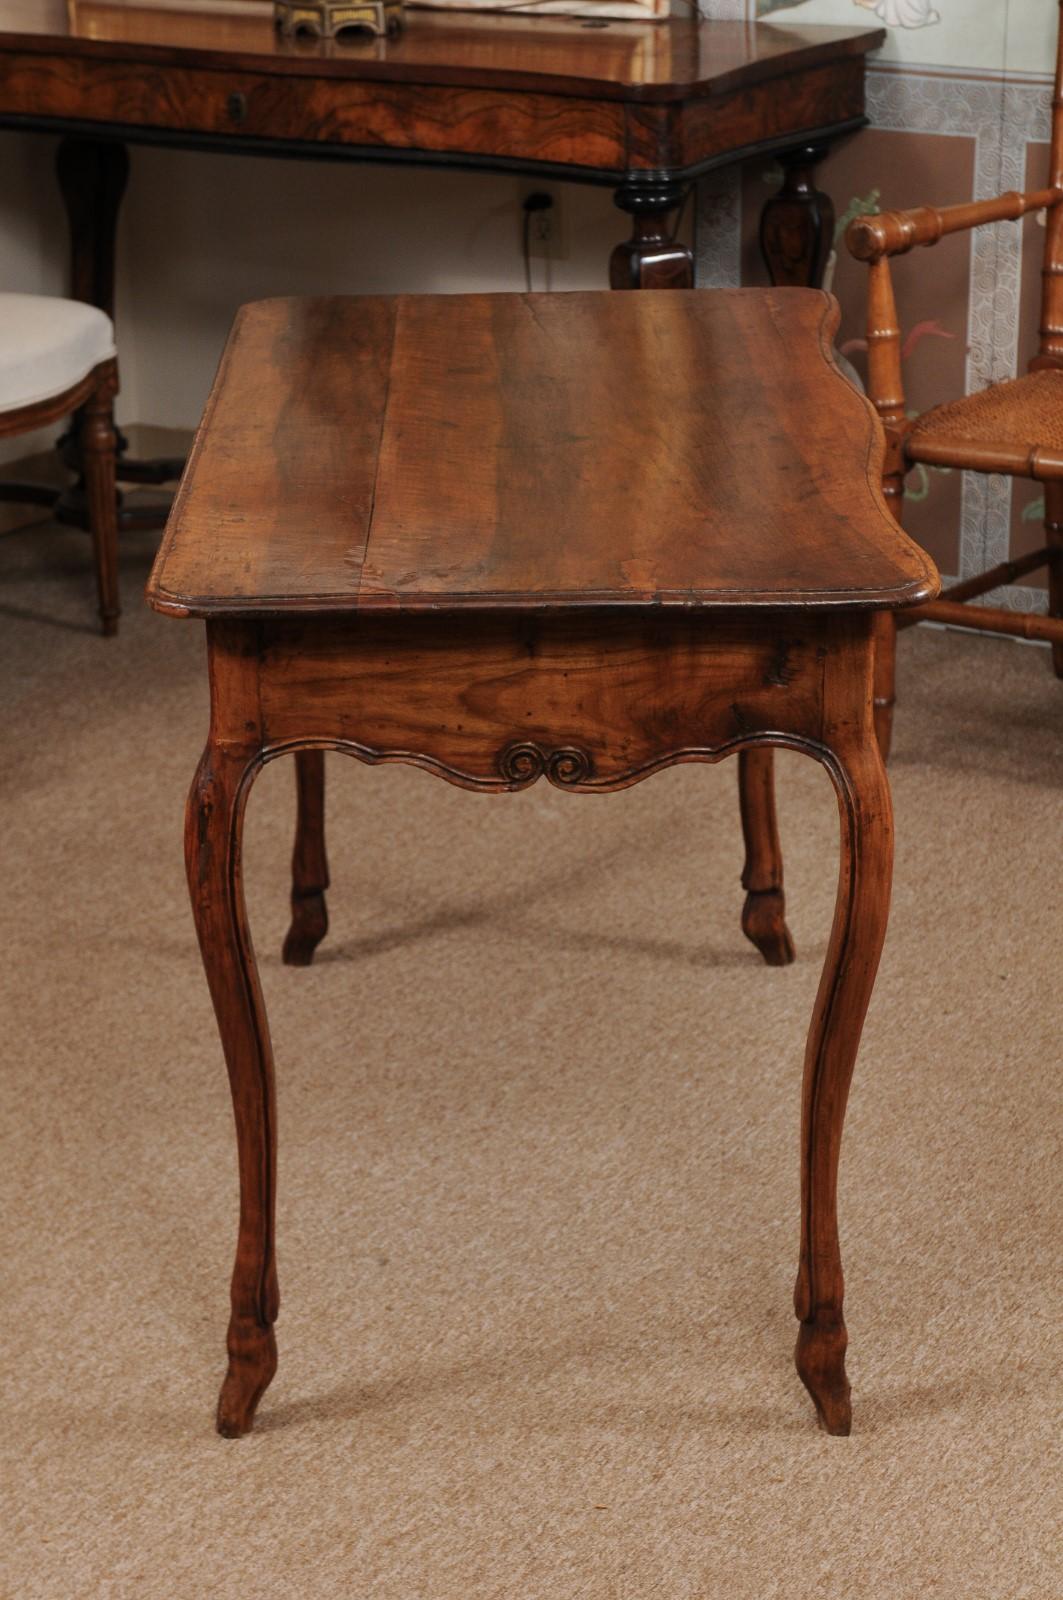 A French Louis XV fruitwood console table with 1-drawer, carved scalloped apron on front and sides. All resting on cabriole legs ending hoofed feet. The edge of the legs and apron with carved molded detail that give a more refined appearance. The